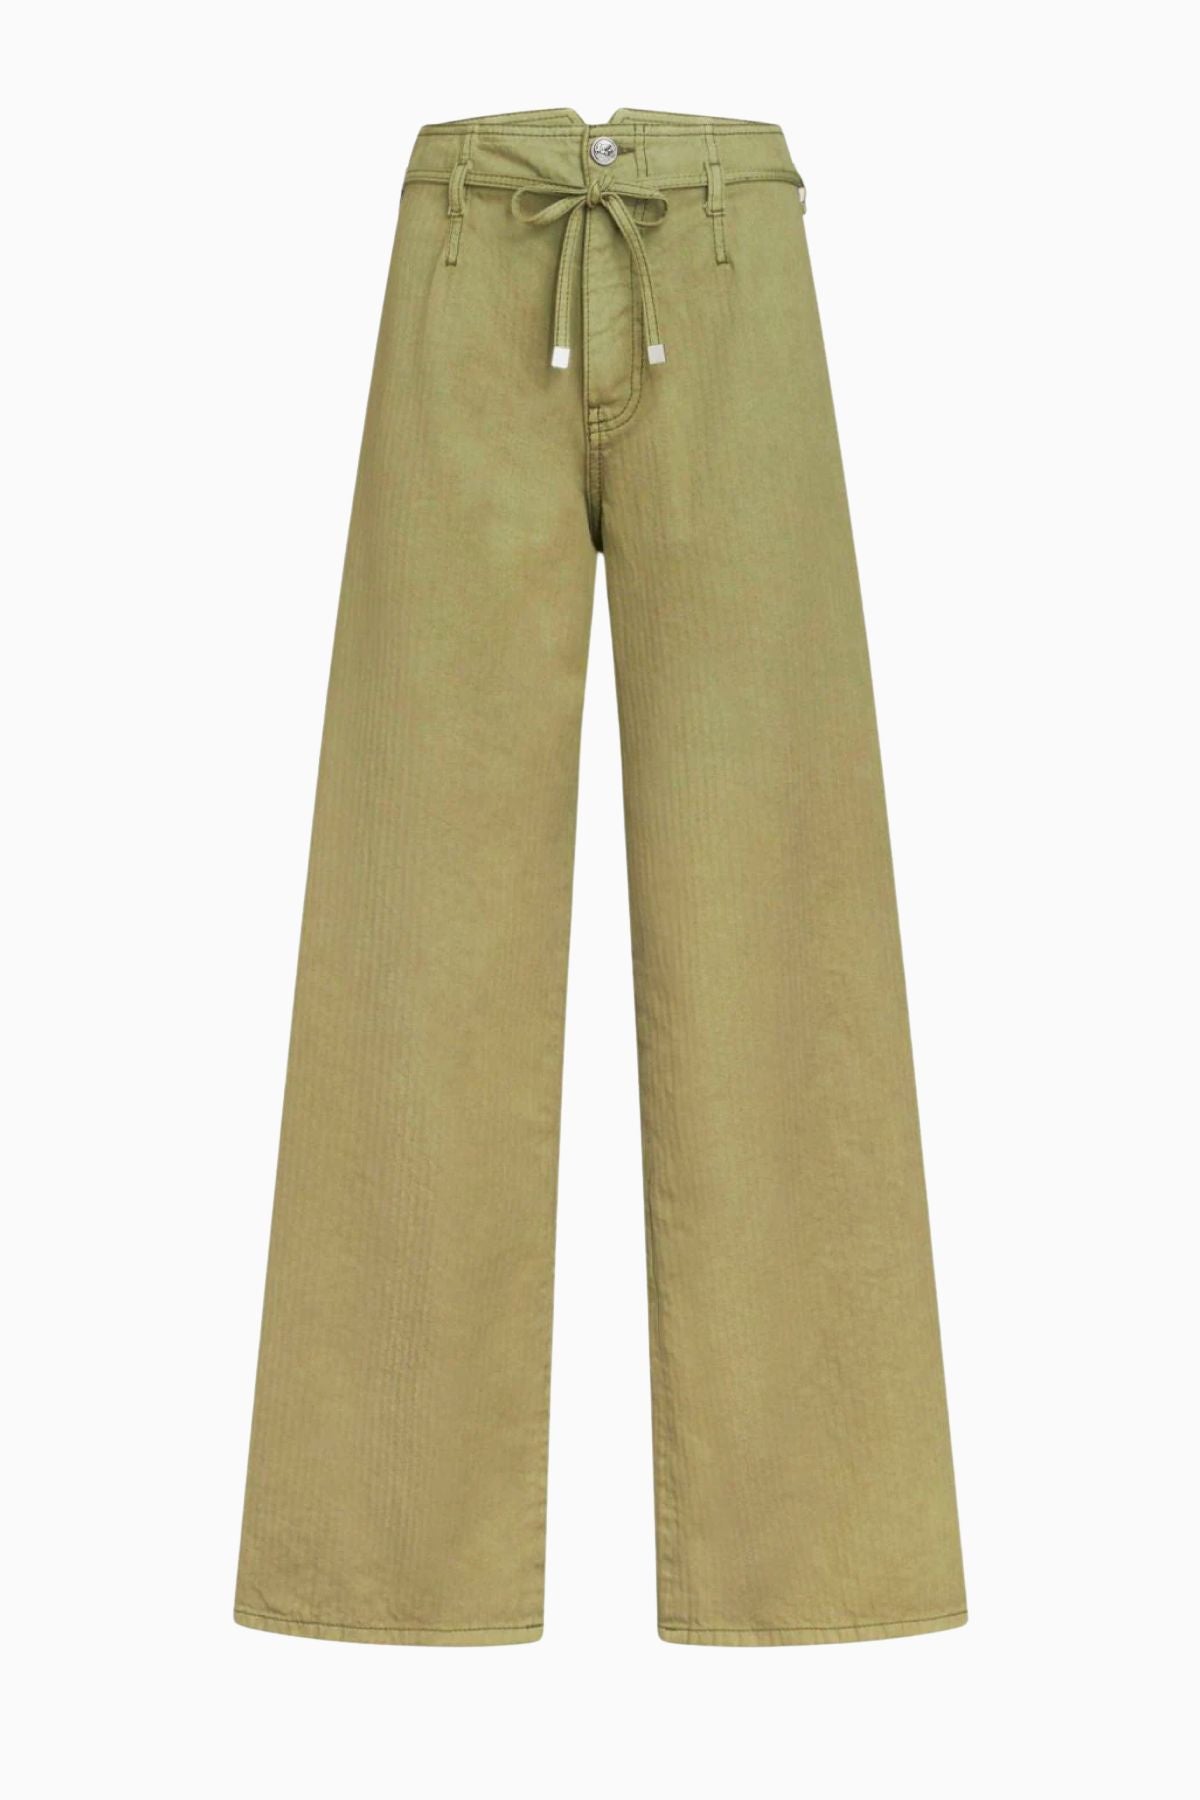 Etro Tie Belted Embroidered Jean - Khaki